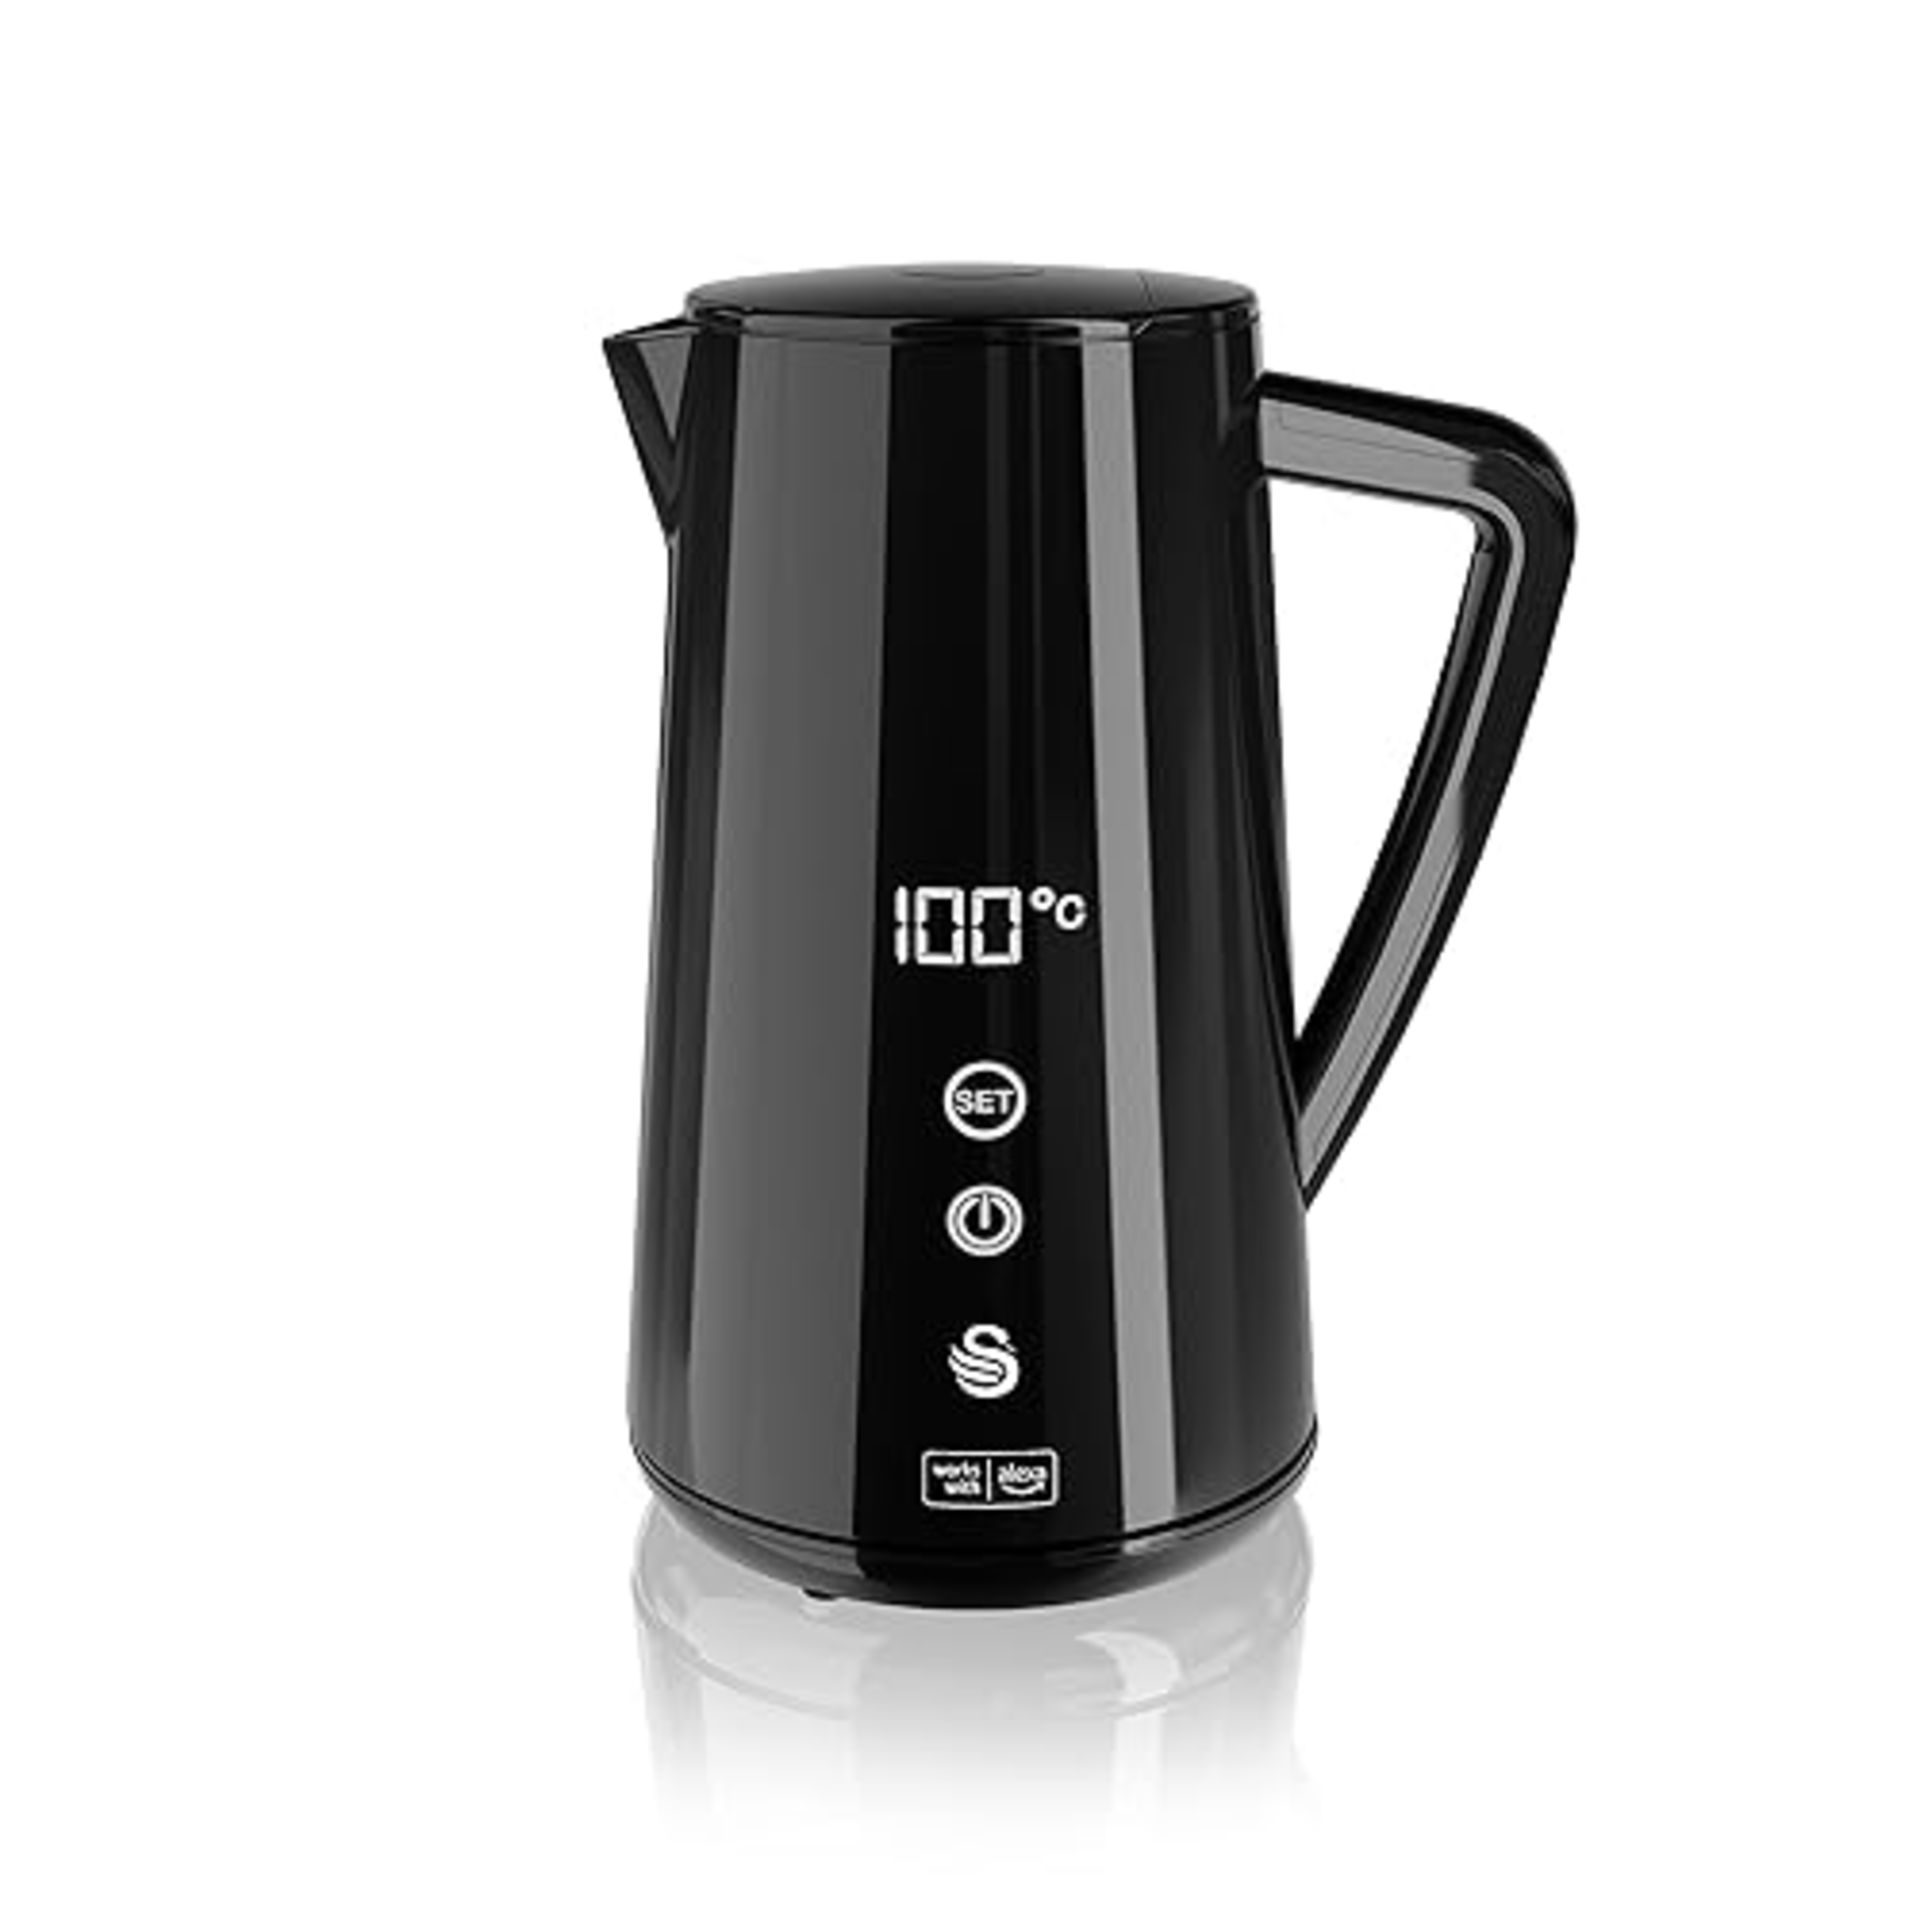 Swan SK14650BLKN Alexa Smart Kettle, LED Touch Display, Keep Warm Function, Stainless Steel Insulat